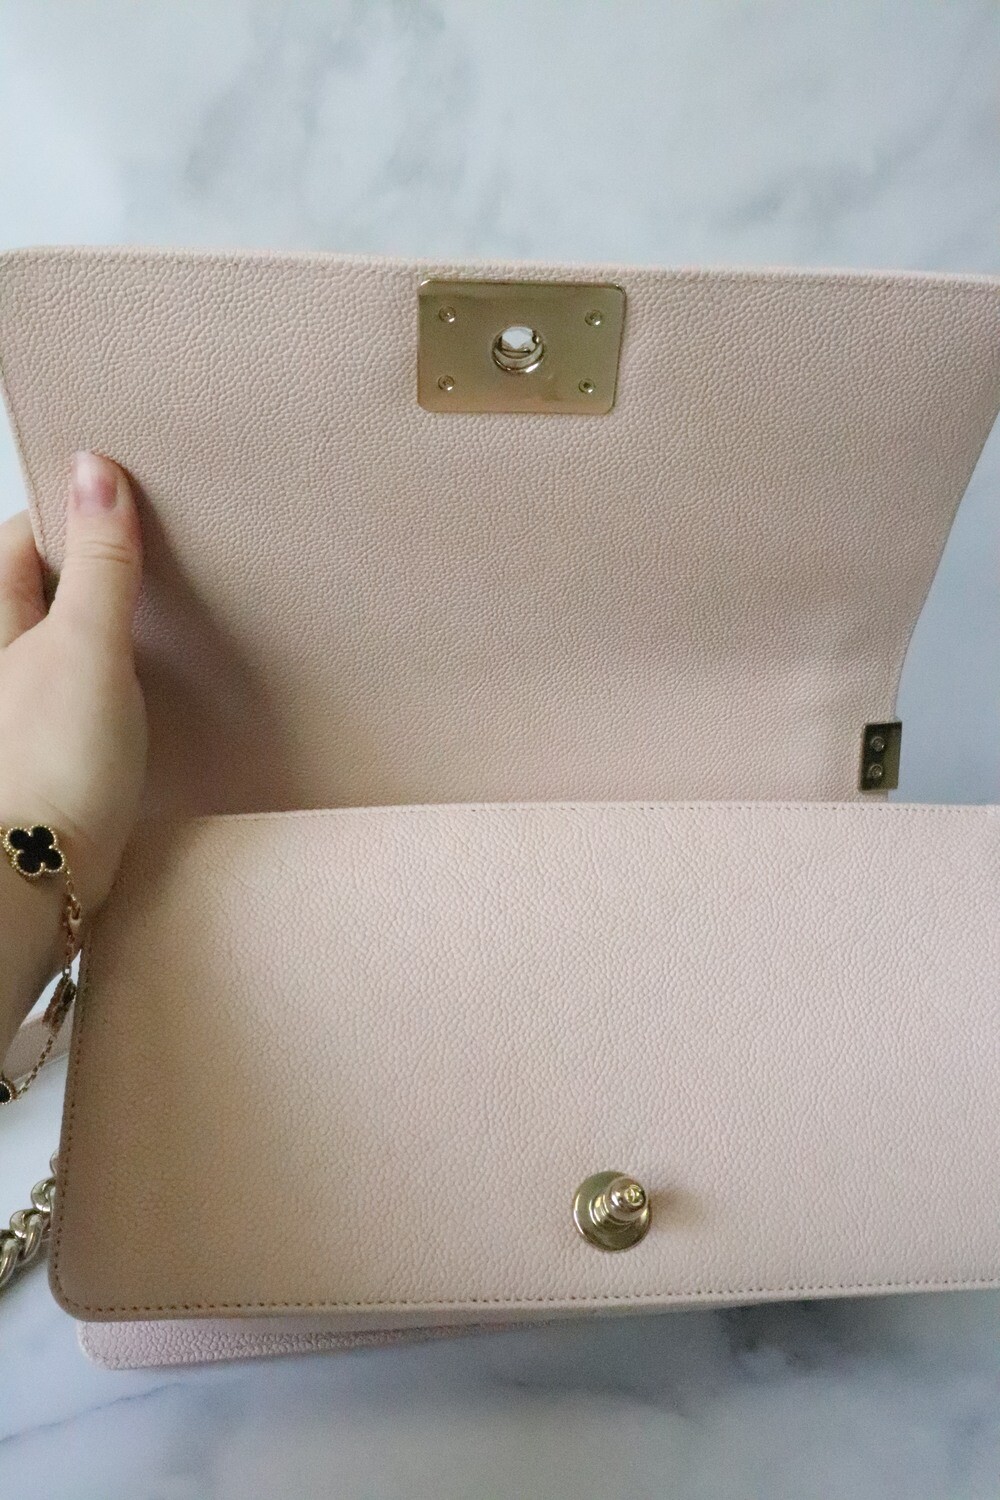 Chanel Vintage Nude Caviar Leather Wallet on Chain WOC For Sale at